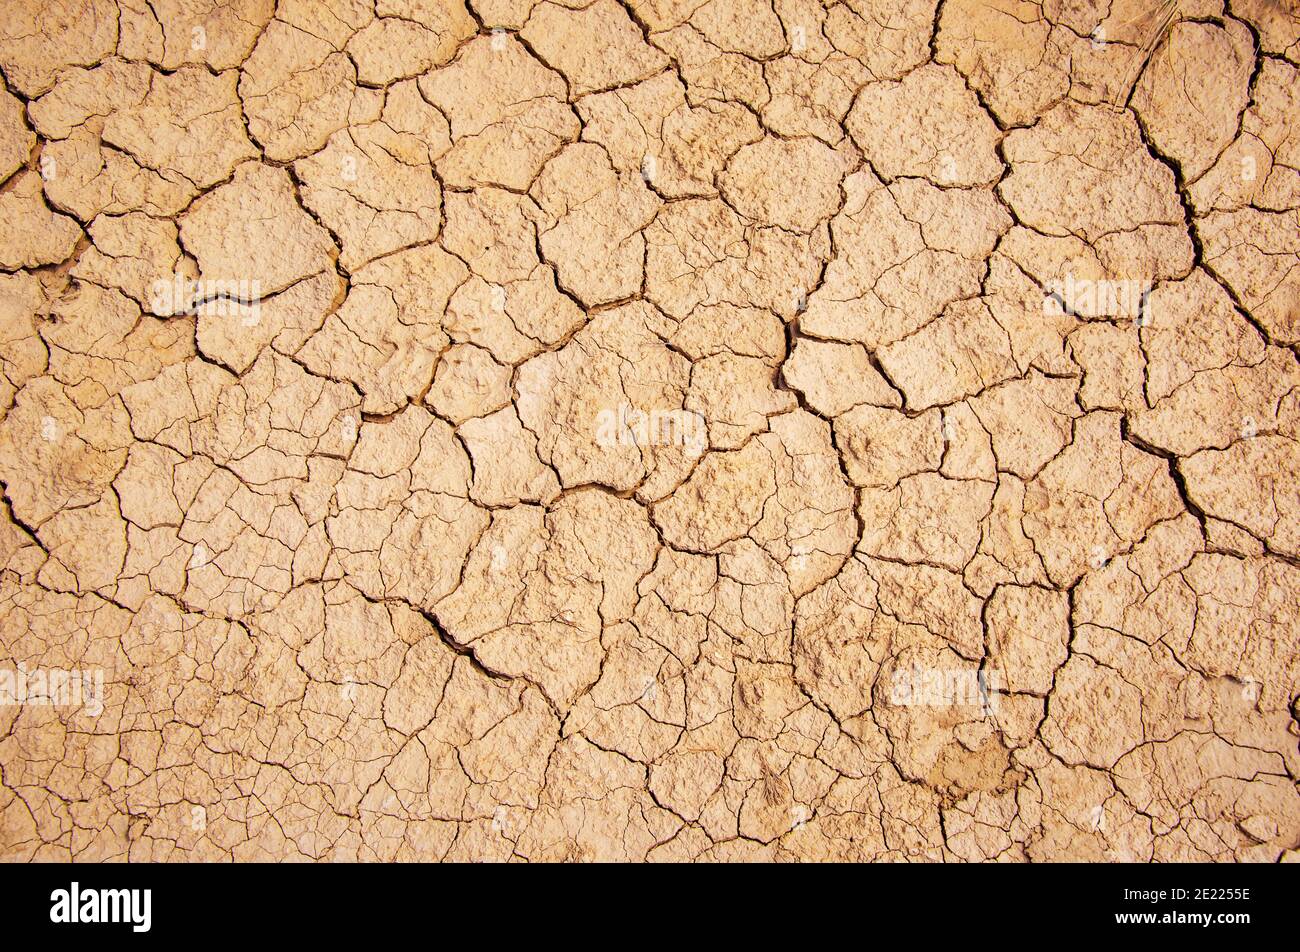 Dried and cracked earth ground background, arid desert texture, global warming concept Stock Photo